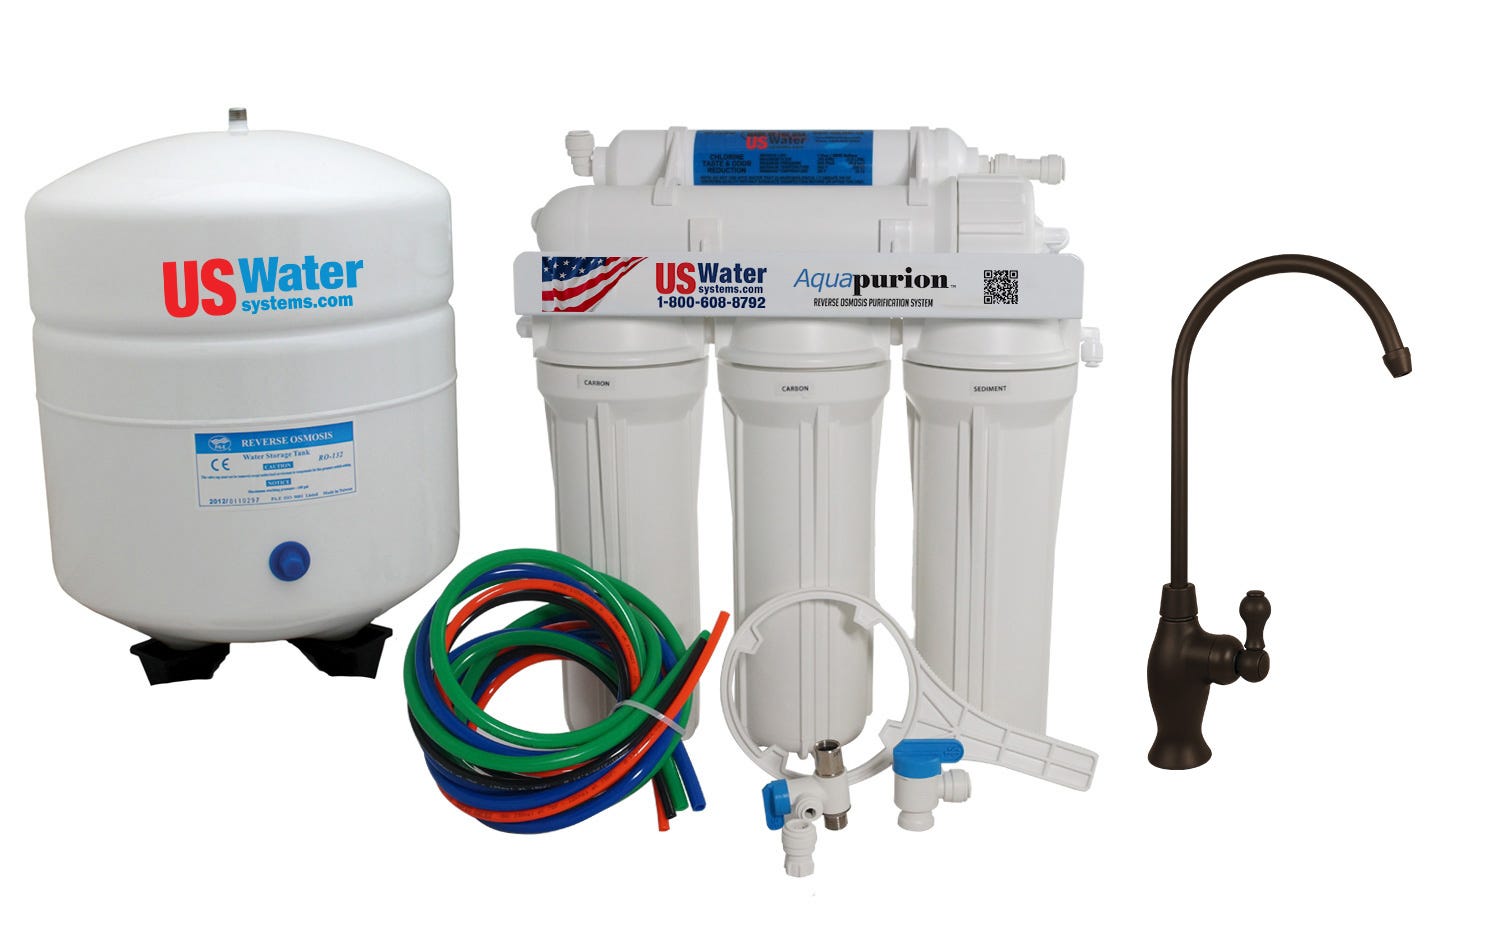 US Water Aquapurion 5-Stage Reverse Osmosis System With Enhanced Chloramine Removal